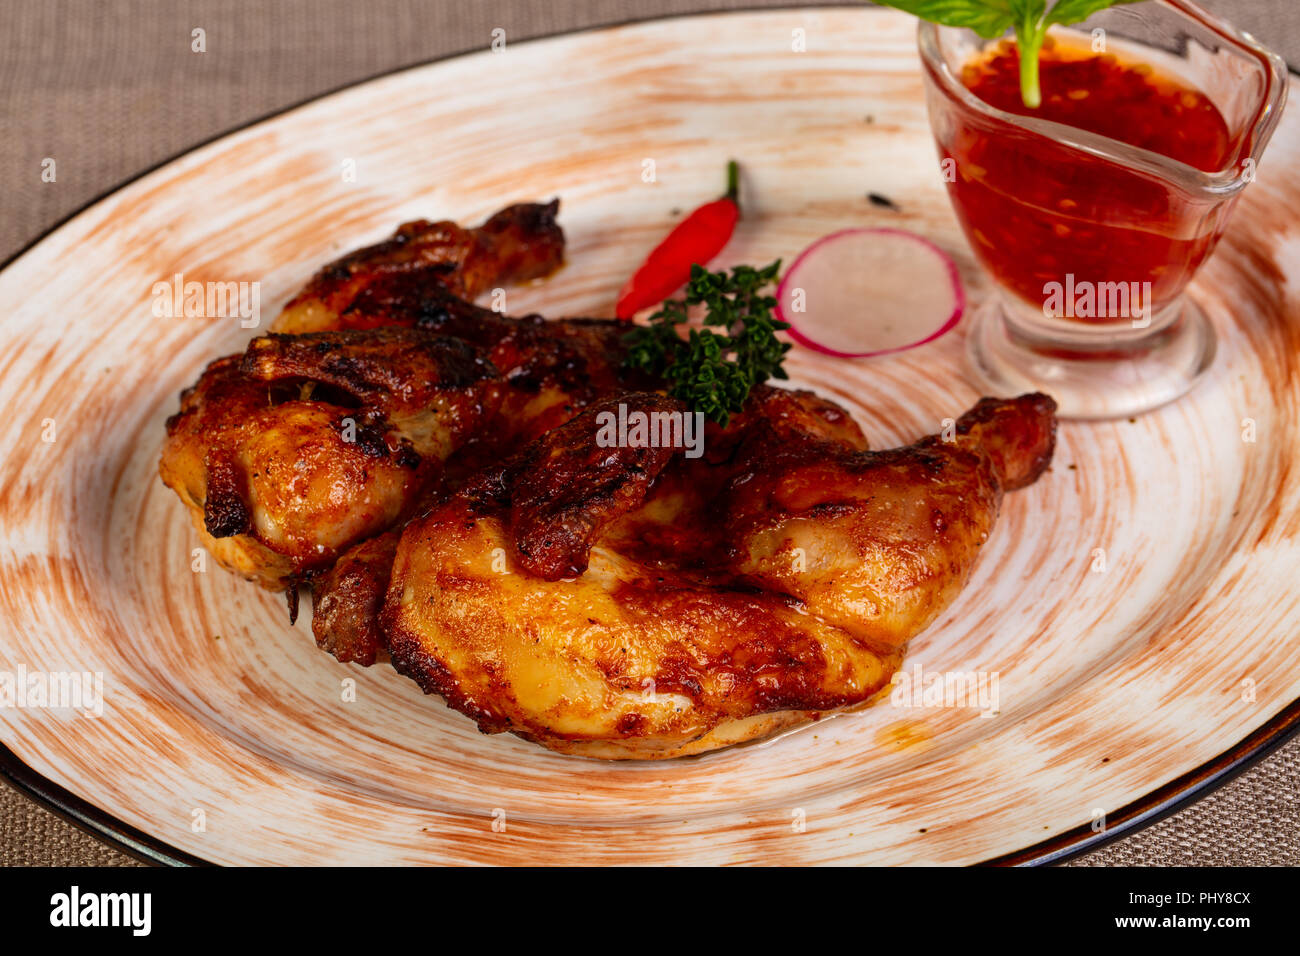 Young roasted chicken with sauce Stock Photo